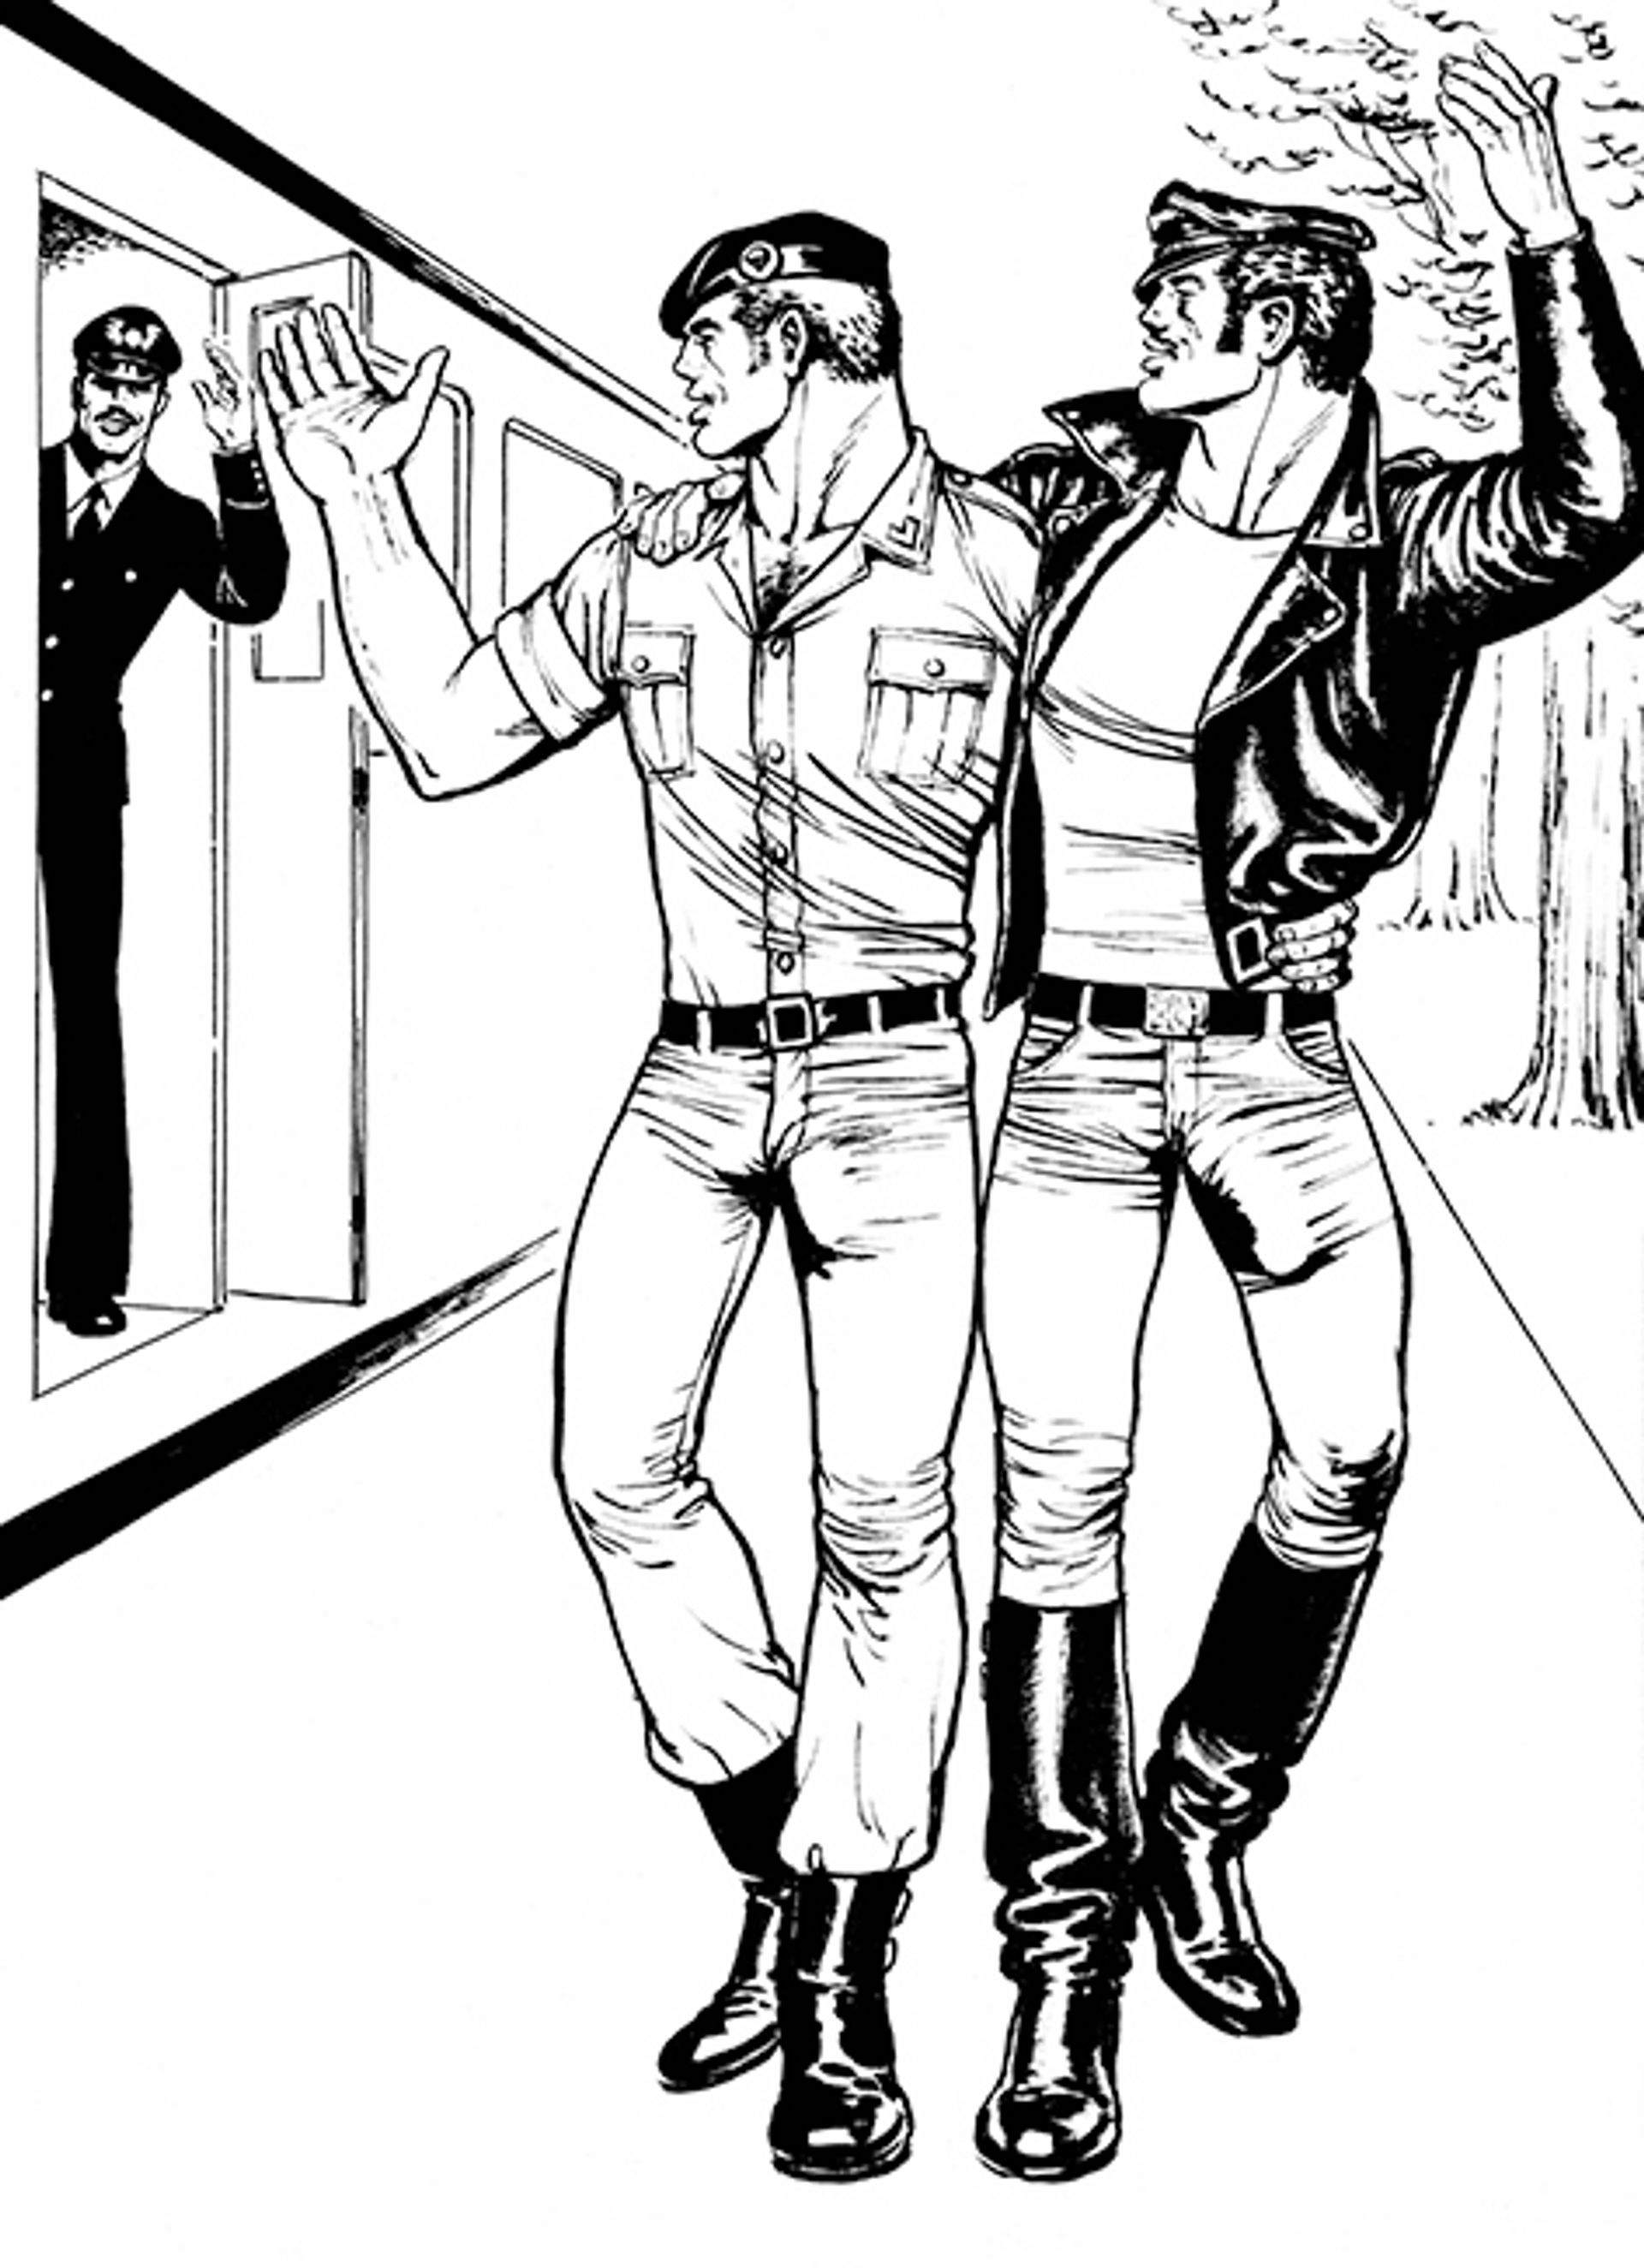 Queer icon Tom of Finland's homoerotic drawings come to London